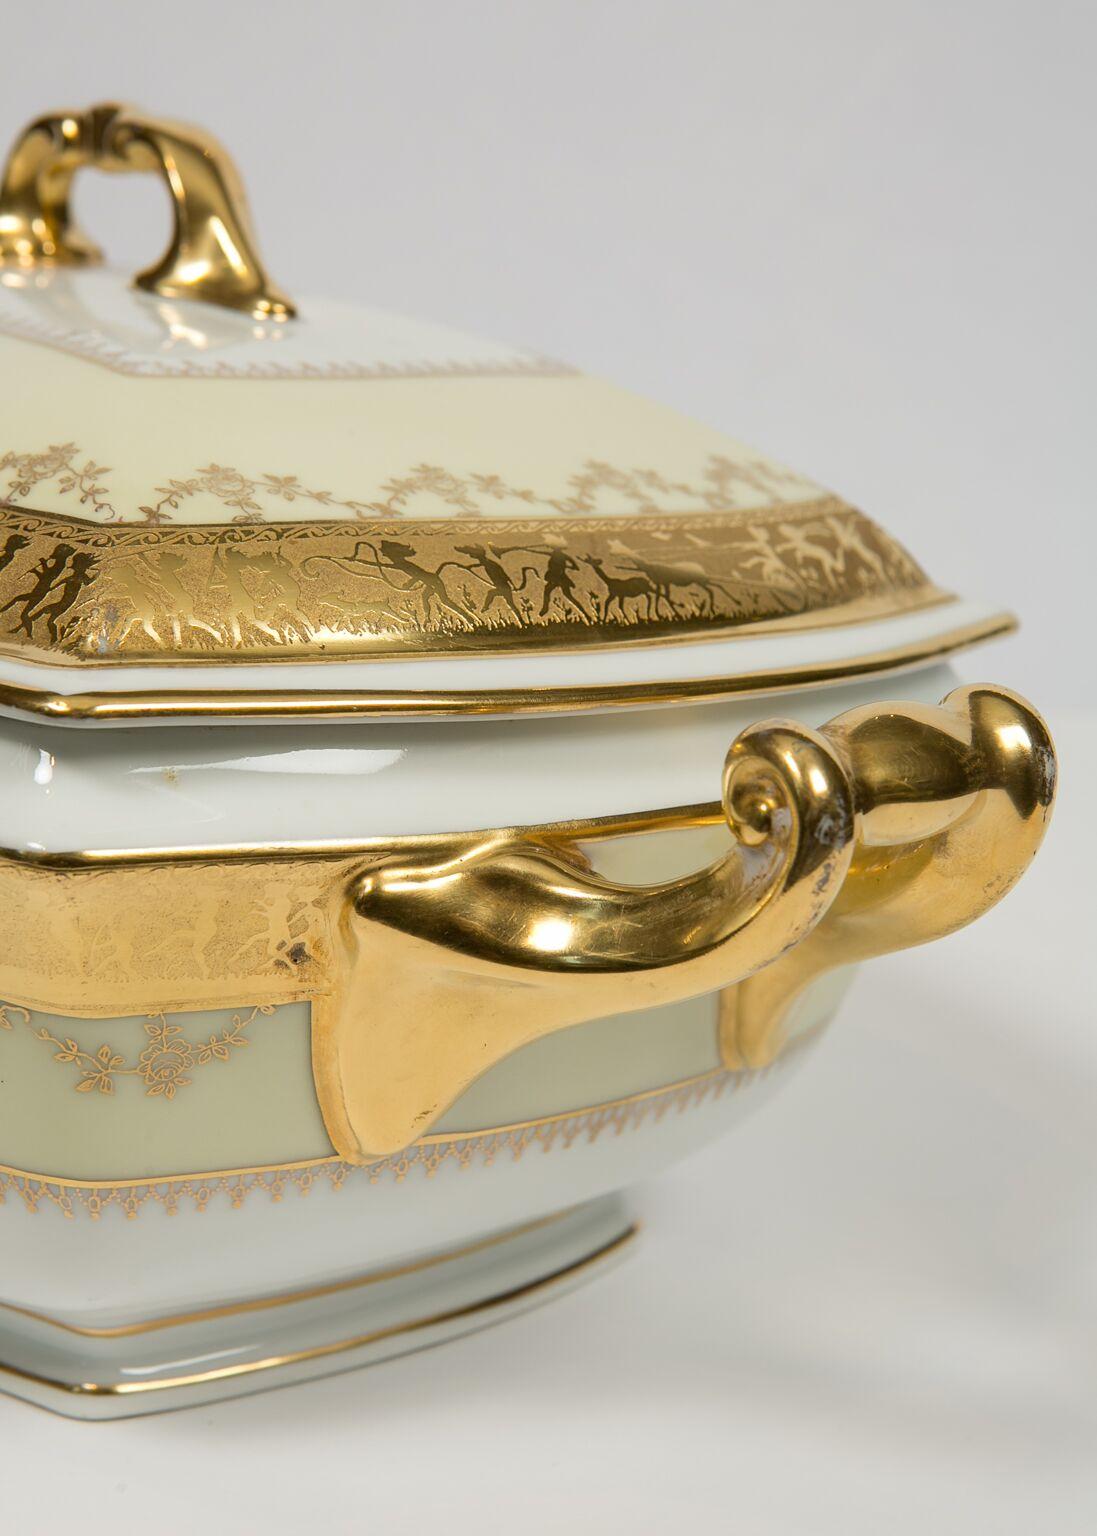 Neoclassical Porcelain Gilded Tureen Made Mid-20th Century For Sale 4